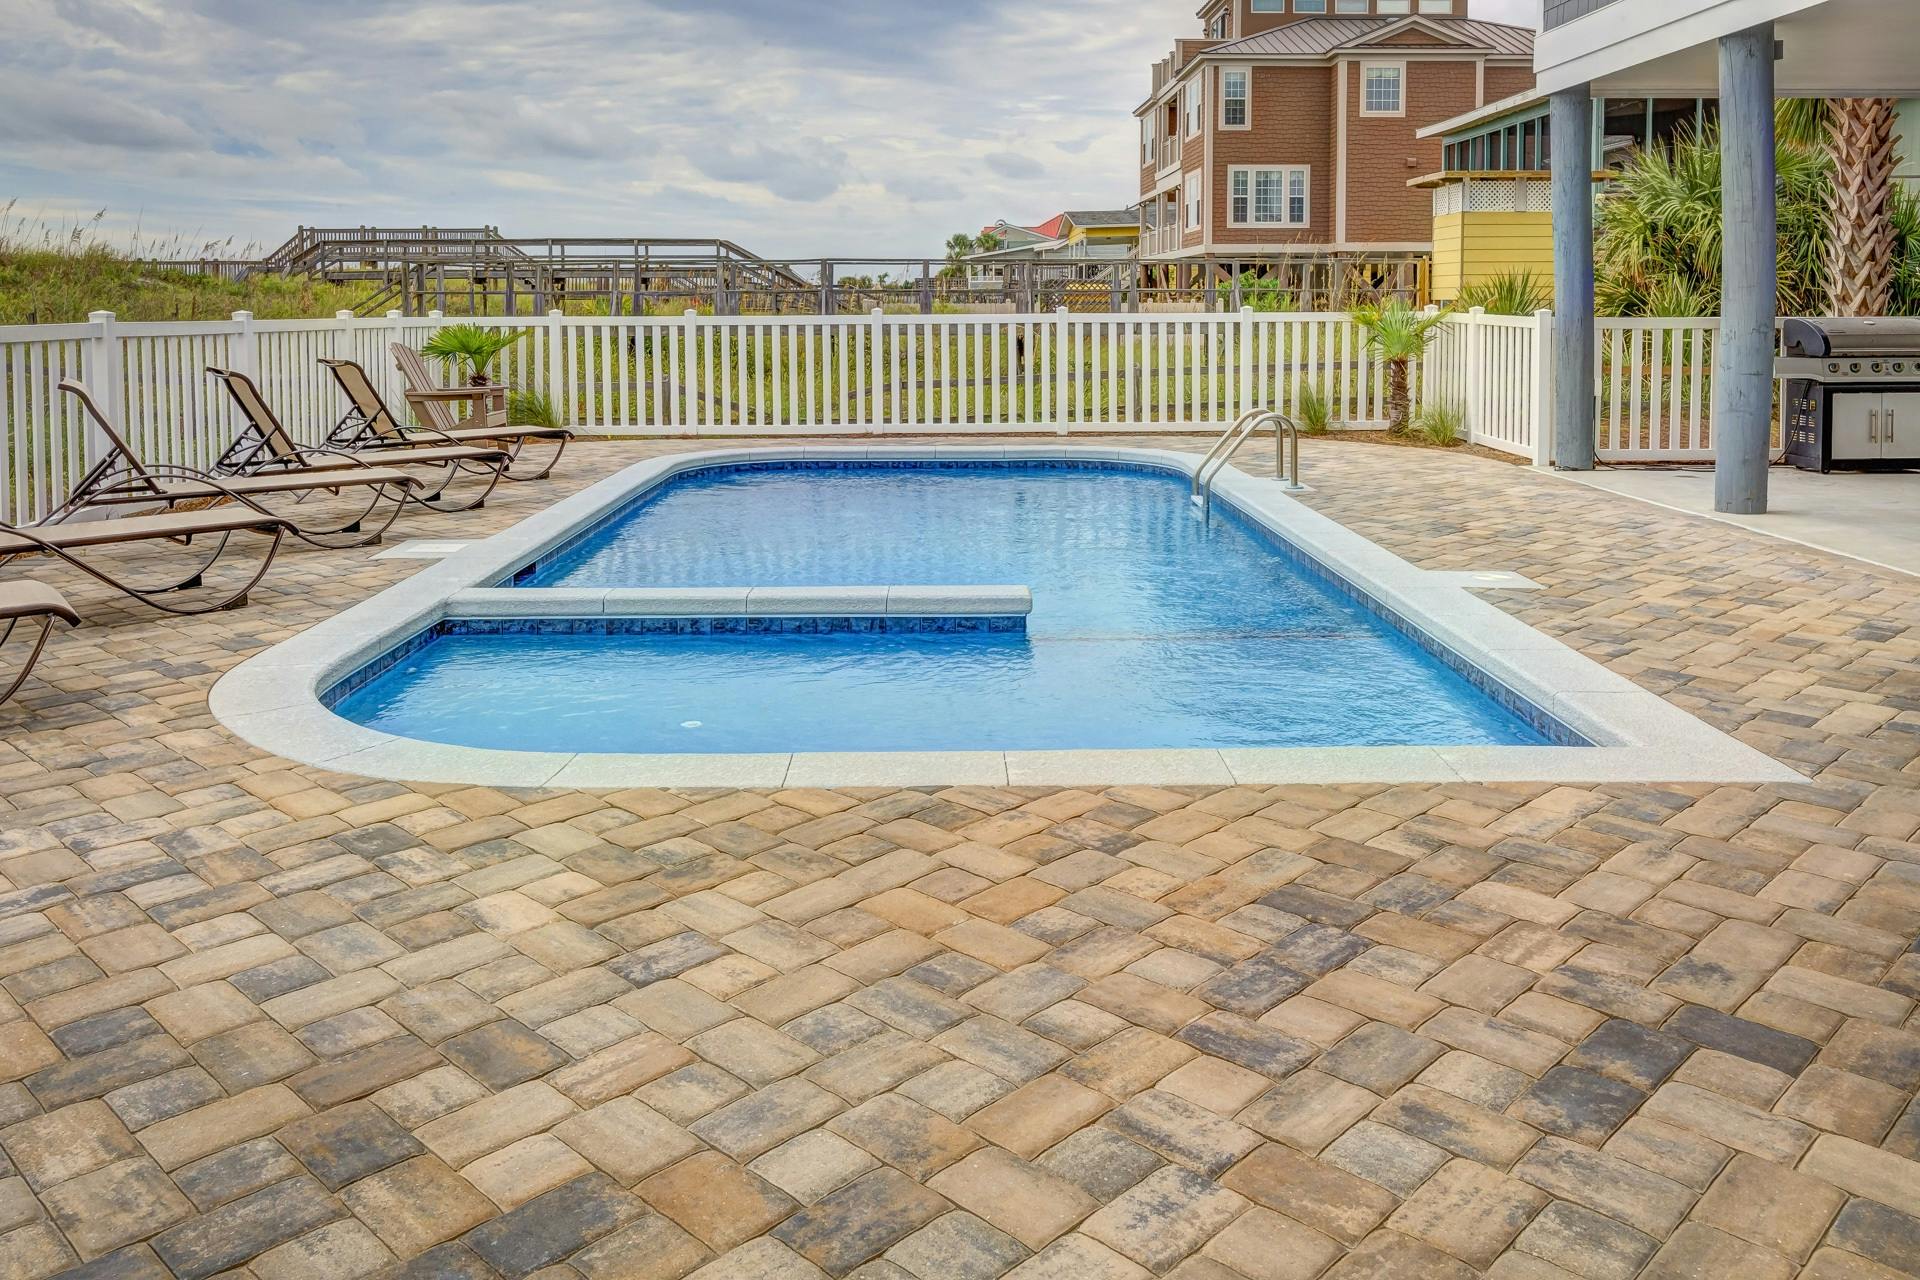 How to Choose the Right Pool Fence for Your Home